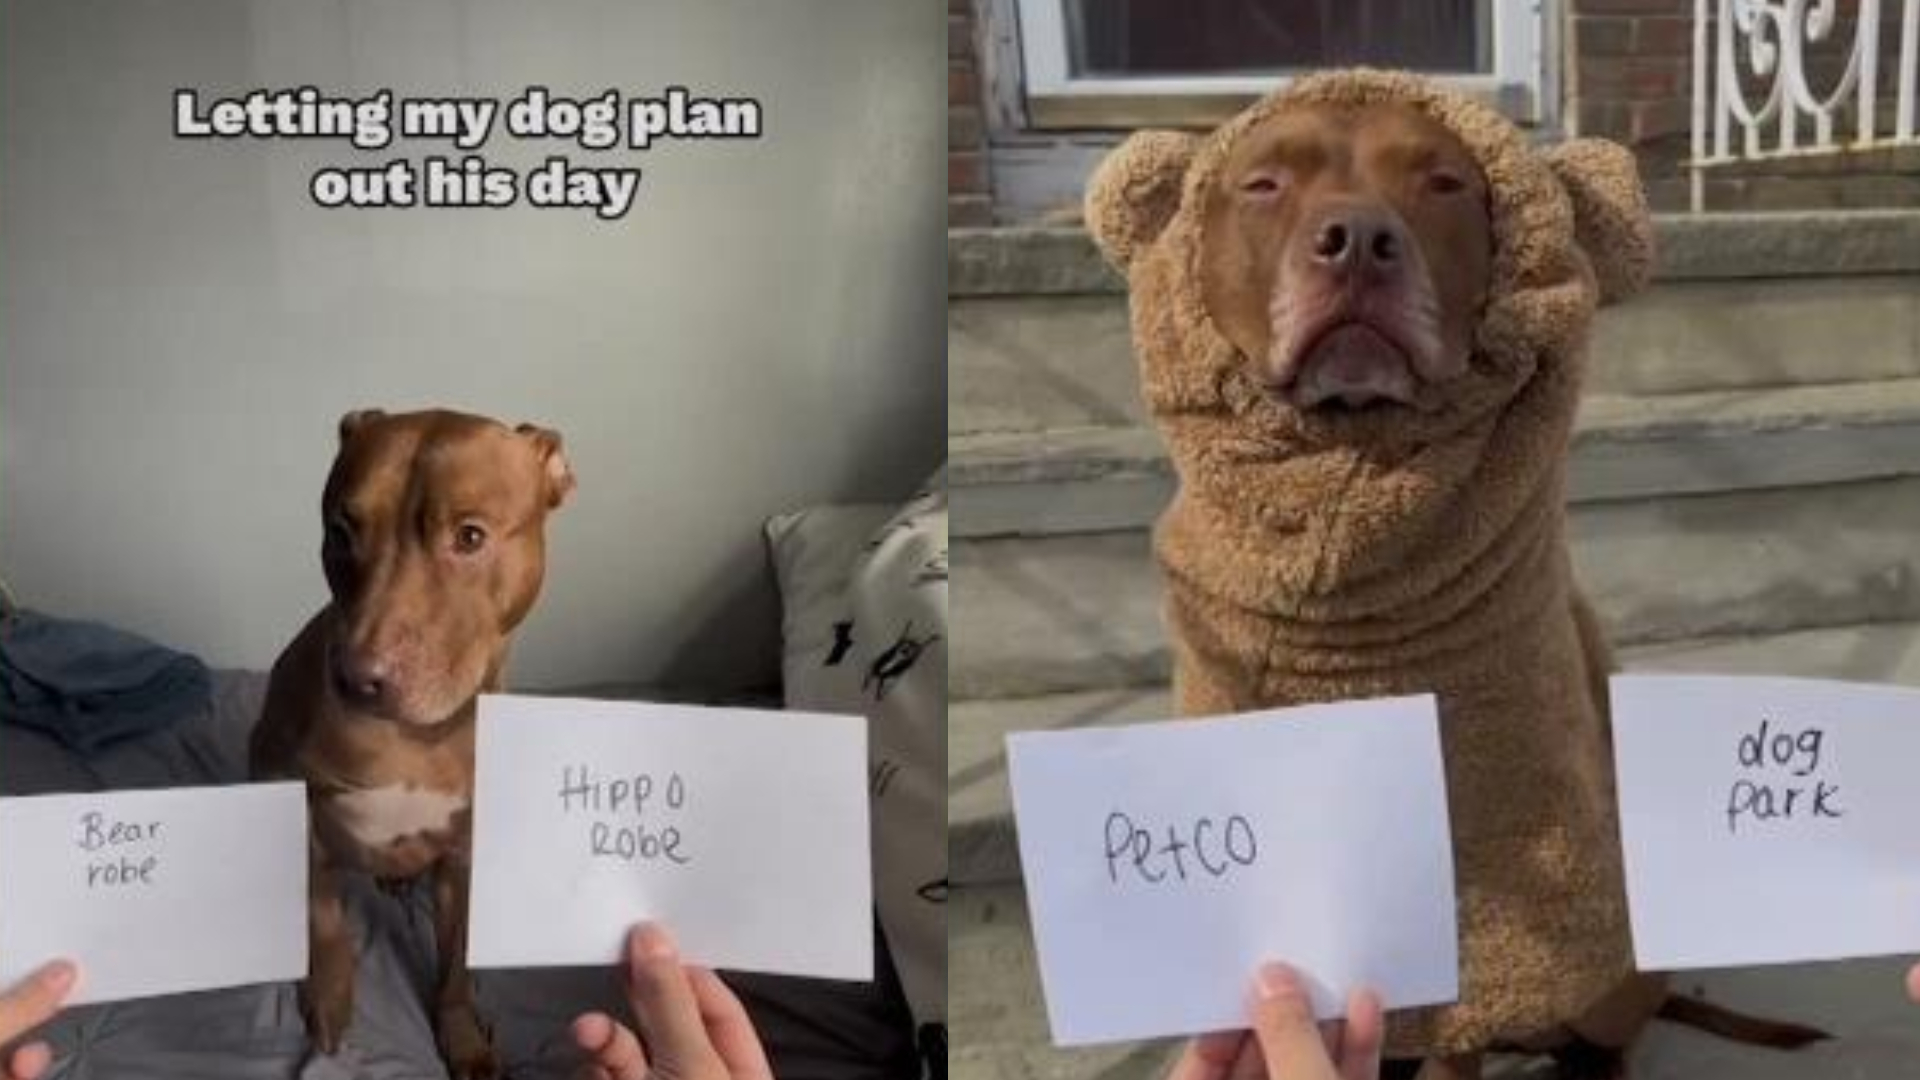 This dog planned out his own day on his own